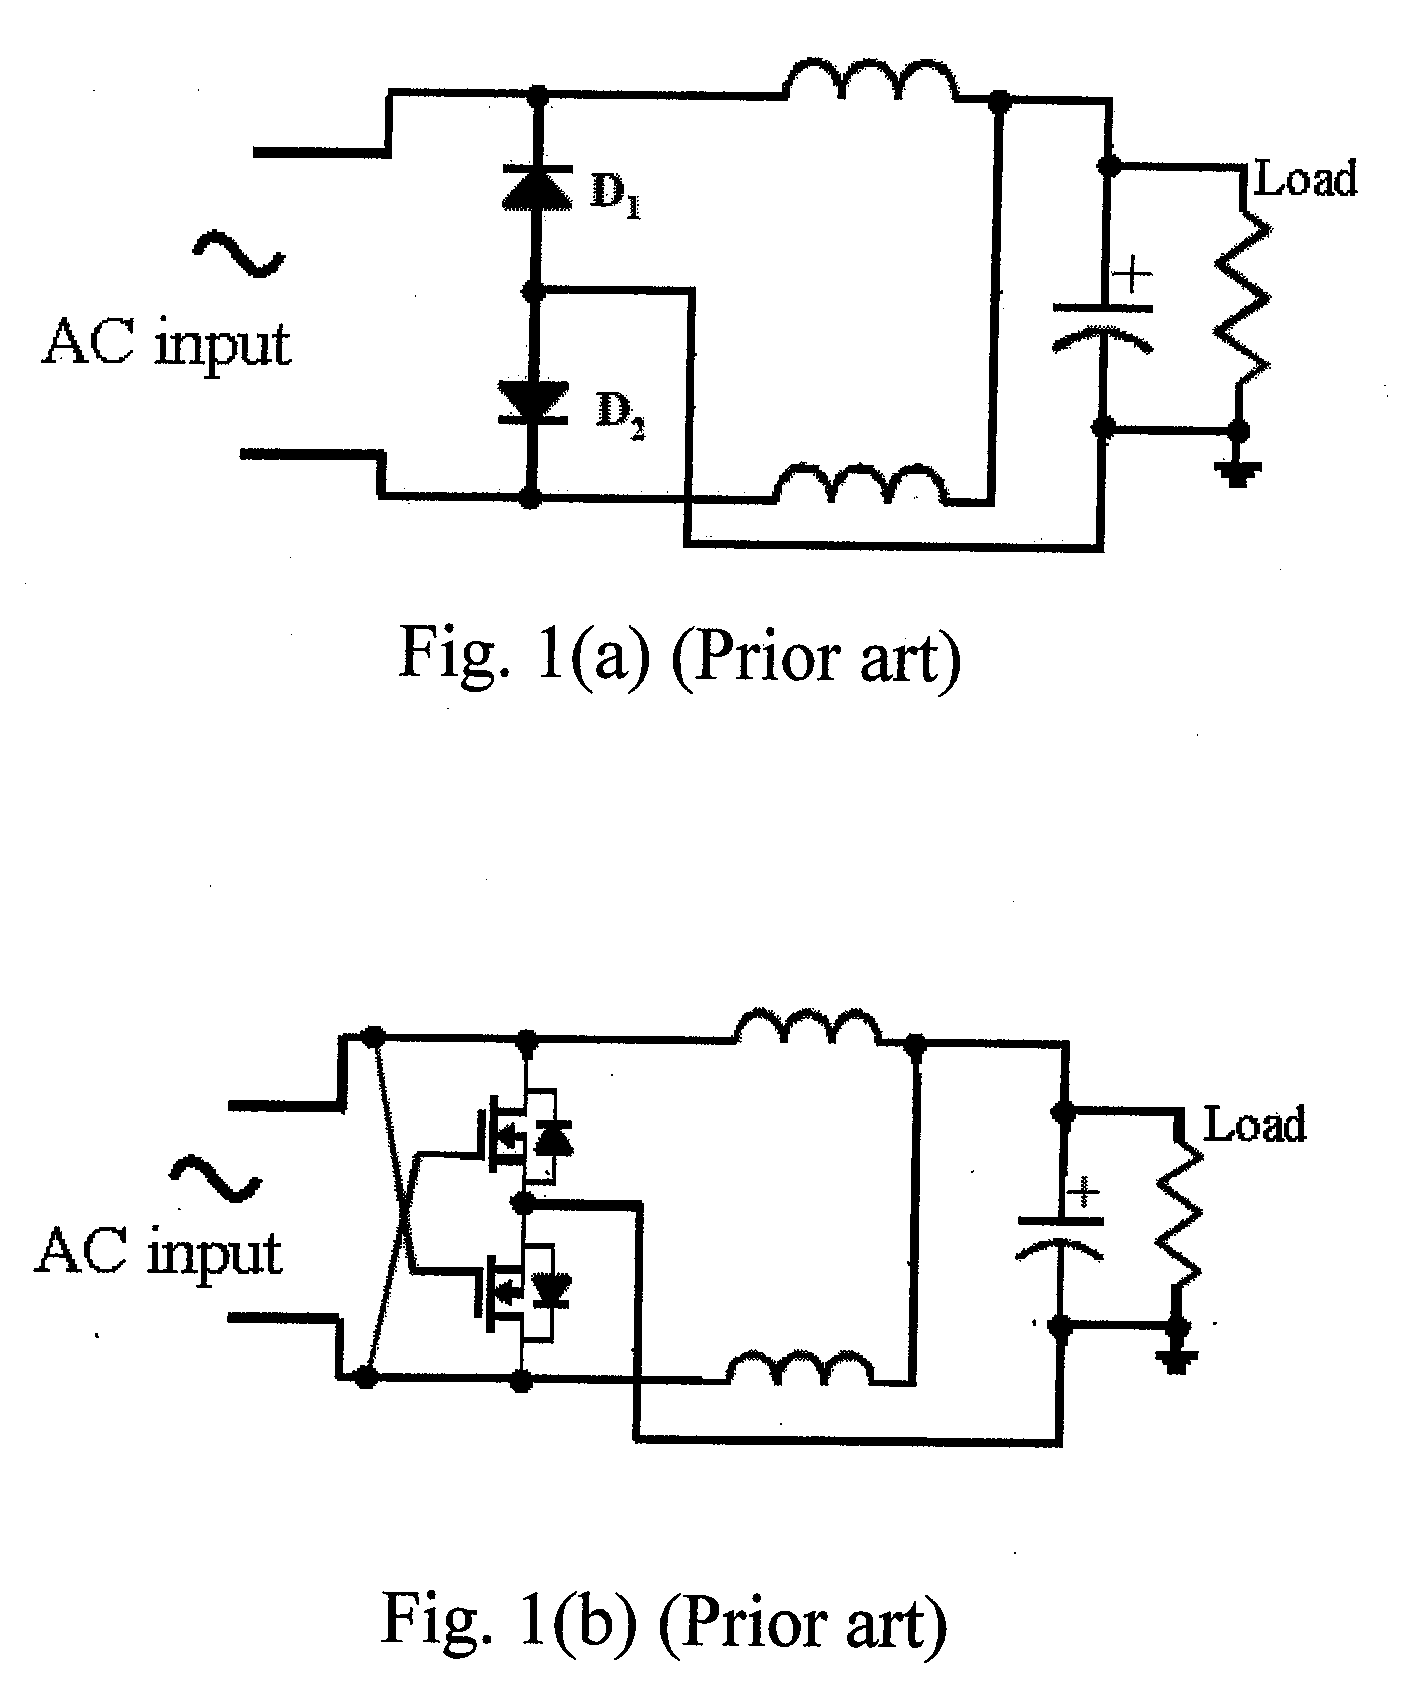 Generalized ac-dc synchronous rectification techniques for single- and multi-phase systems